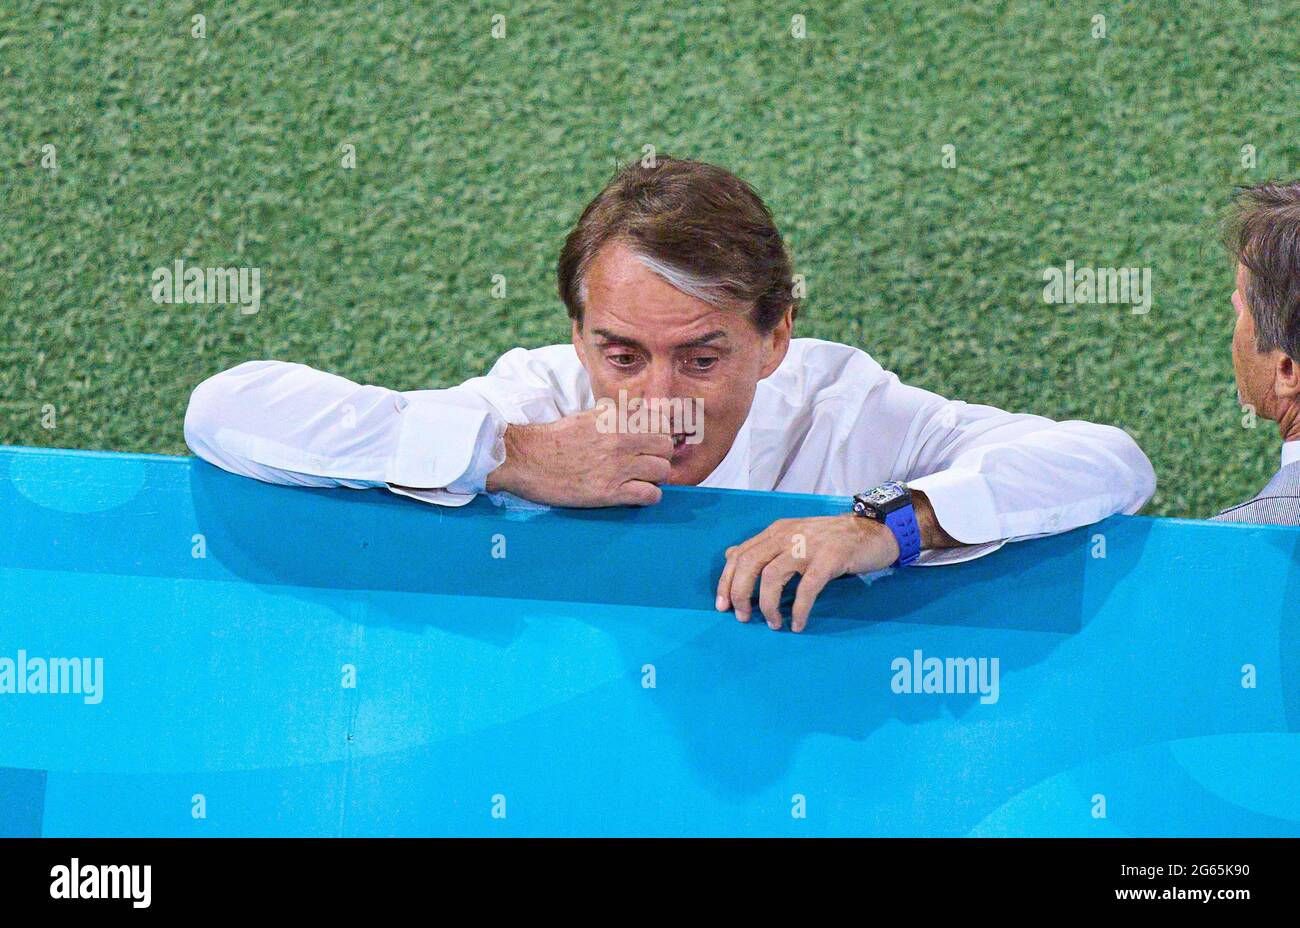 Roberto Manchini, ITA headcoach, team manager, Nationaltrainer,  in the quarterfinal match BELGIUM - ITALY  at the football UEFA European Championships 2020 in Season 2020/2021 on July 02, 2021  in Munich, Germany. © Peter Schatz / Alamy Live News Stock Photo